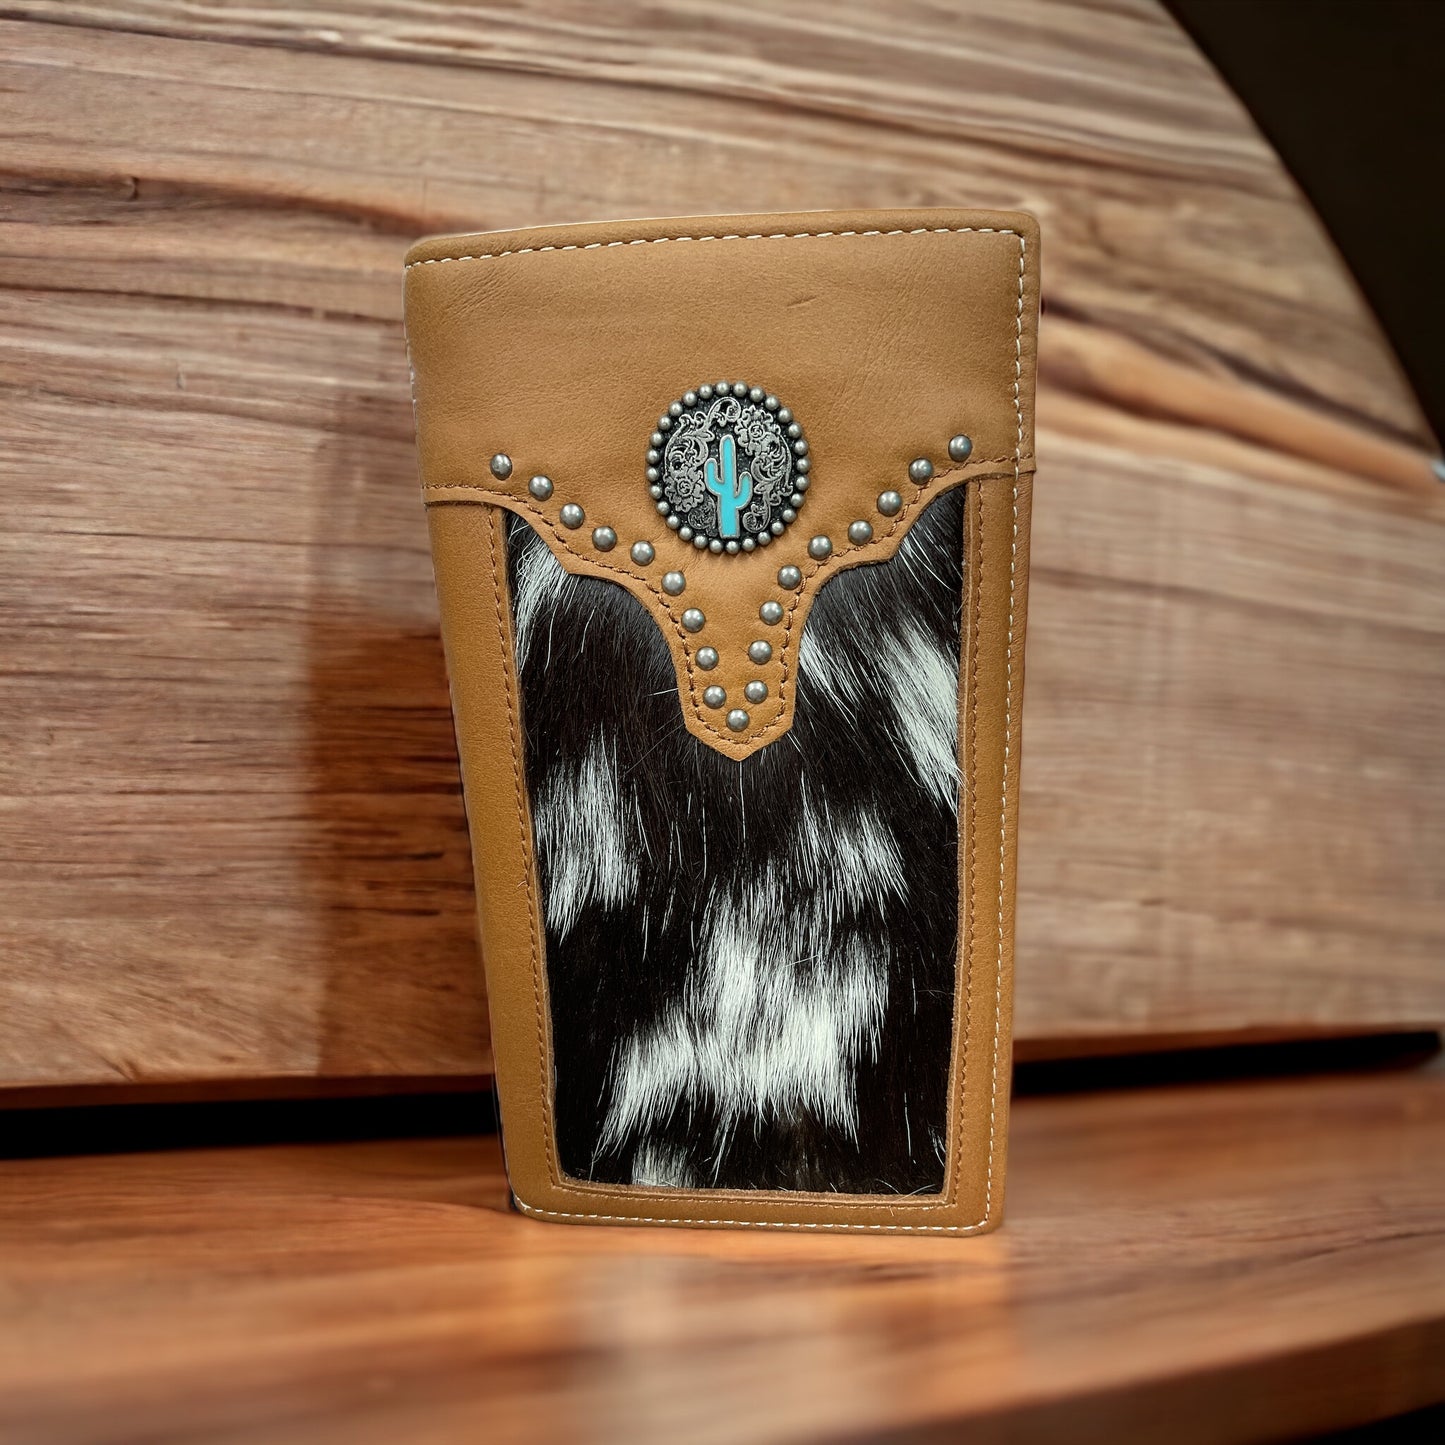 Men’s Luxury Montana West Genuine Hair-On Leather Pistol Collection Men's Wallets